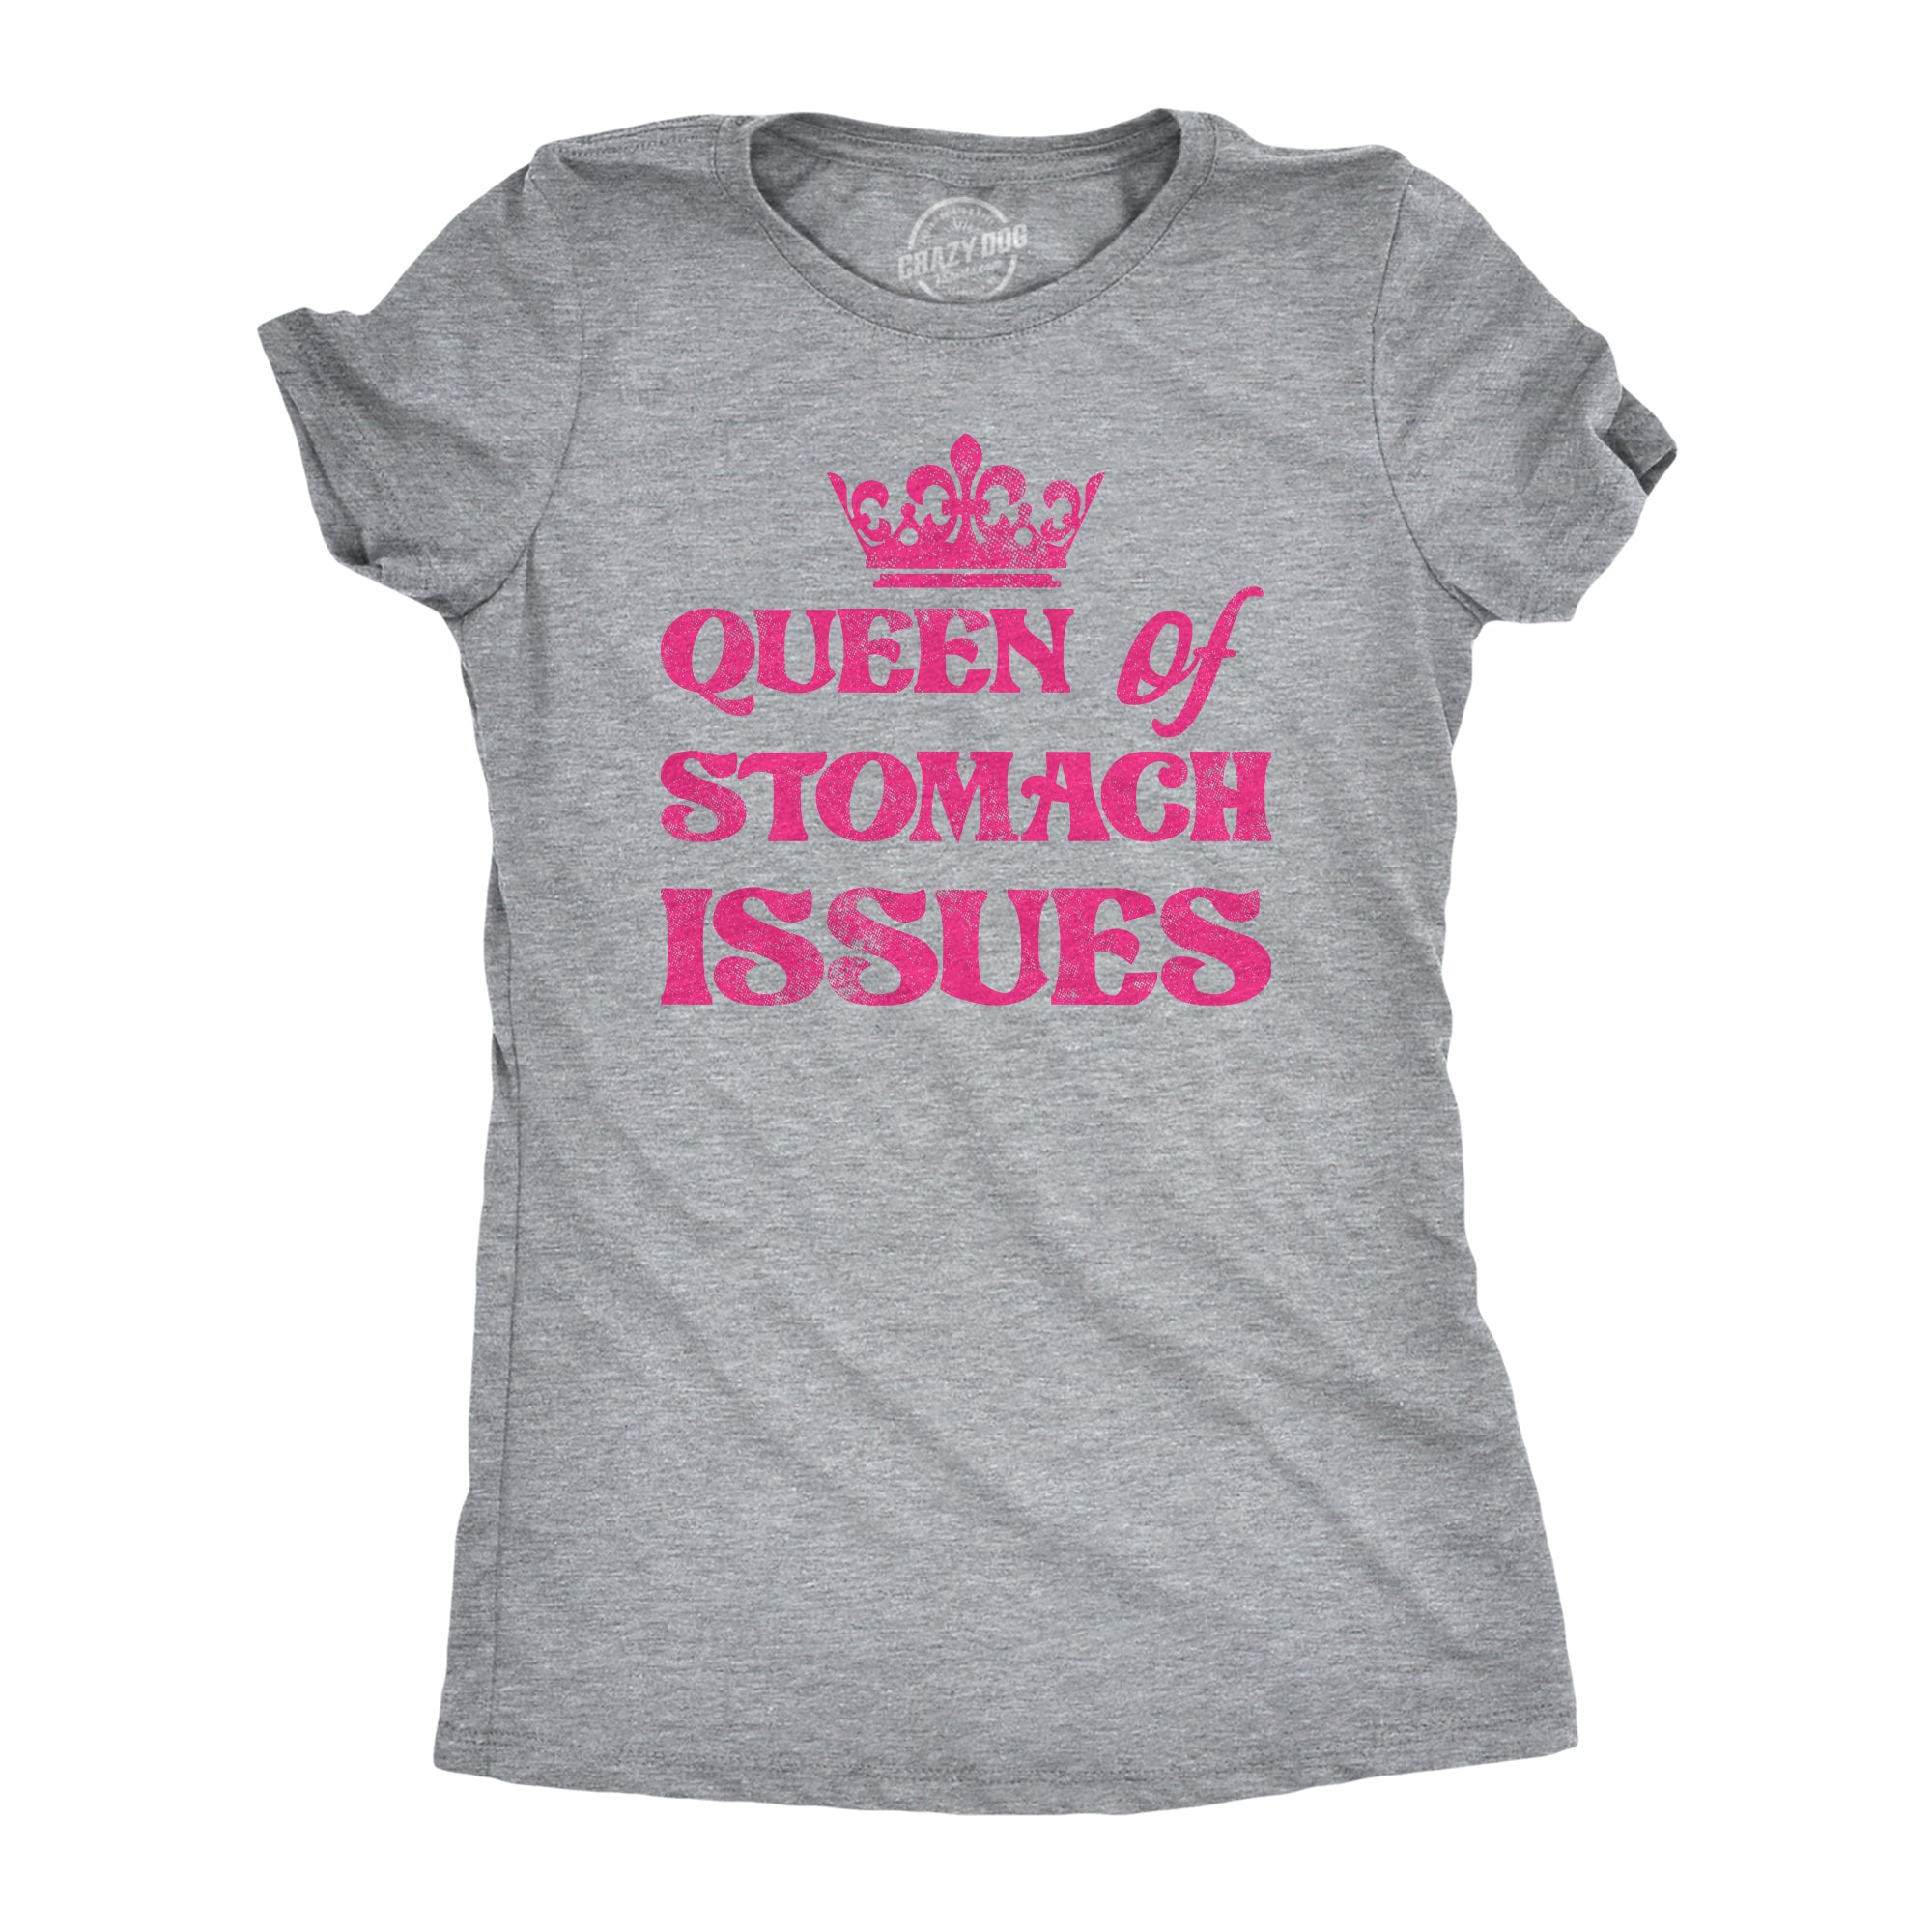 Funny Light Heather Grey - STOMACH Queen Of Stomach Issues Womens T Shirt Nerdy Sarcastic Tee